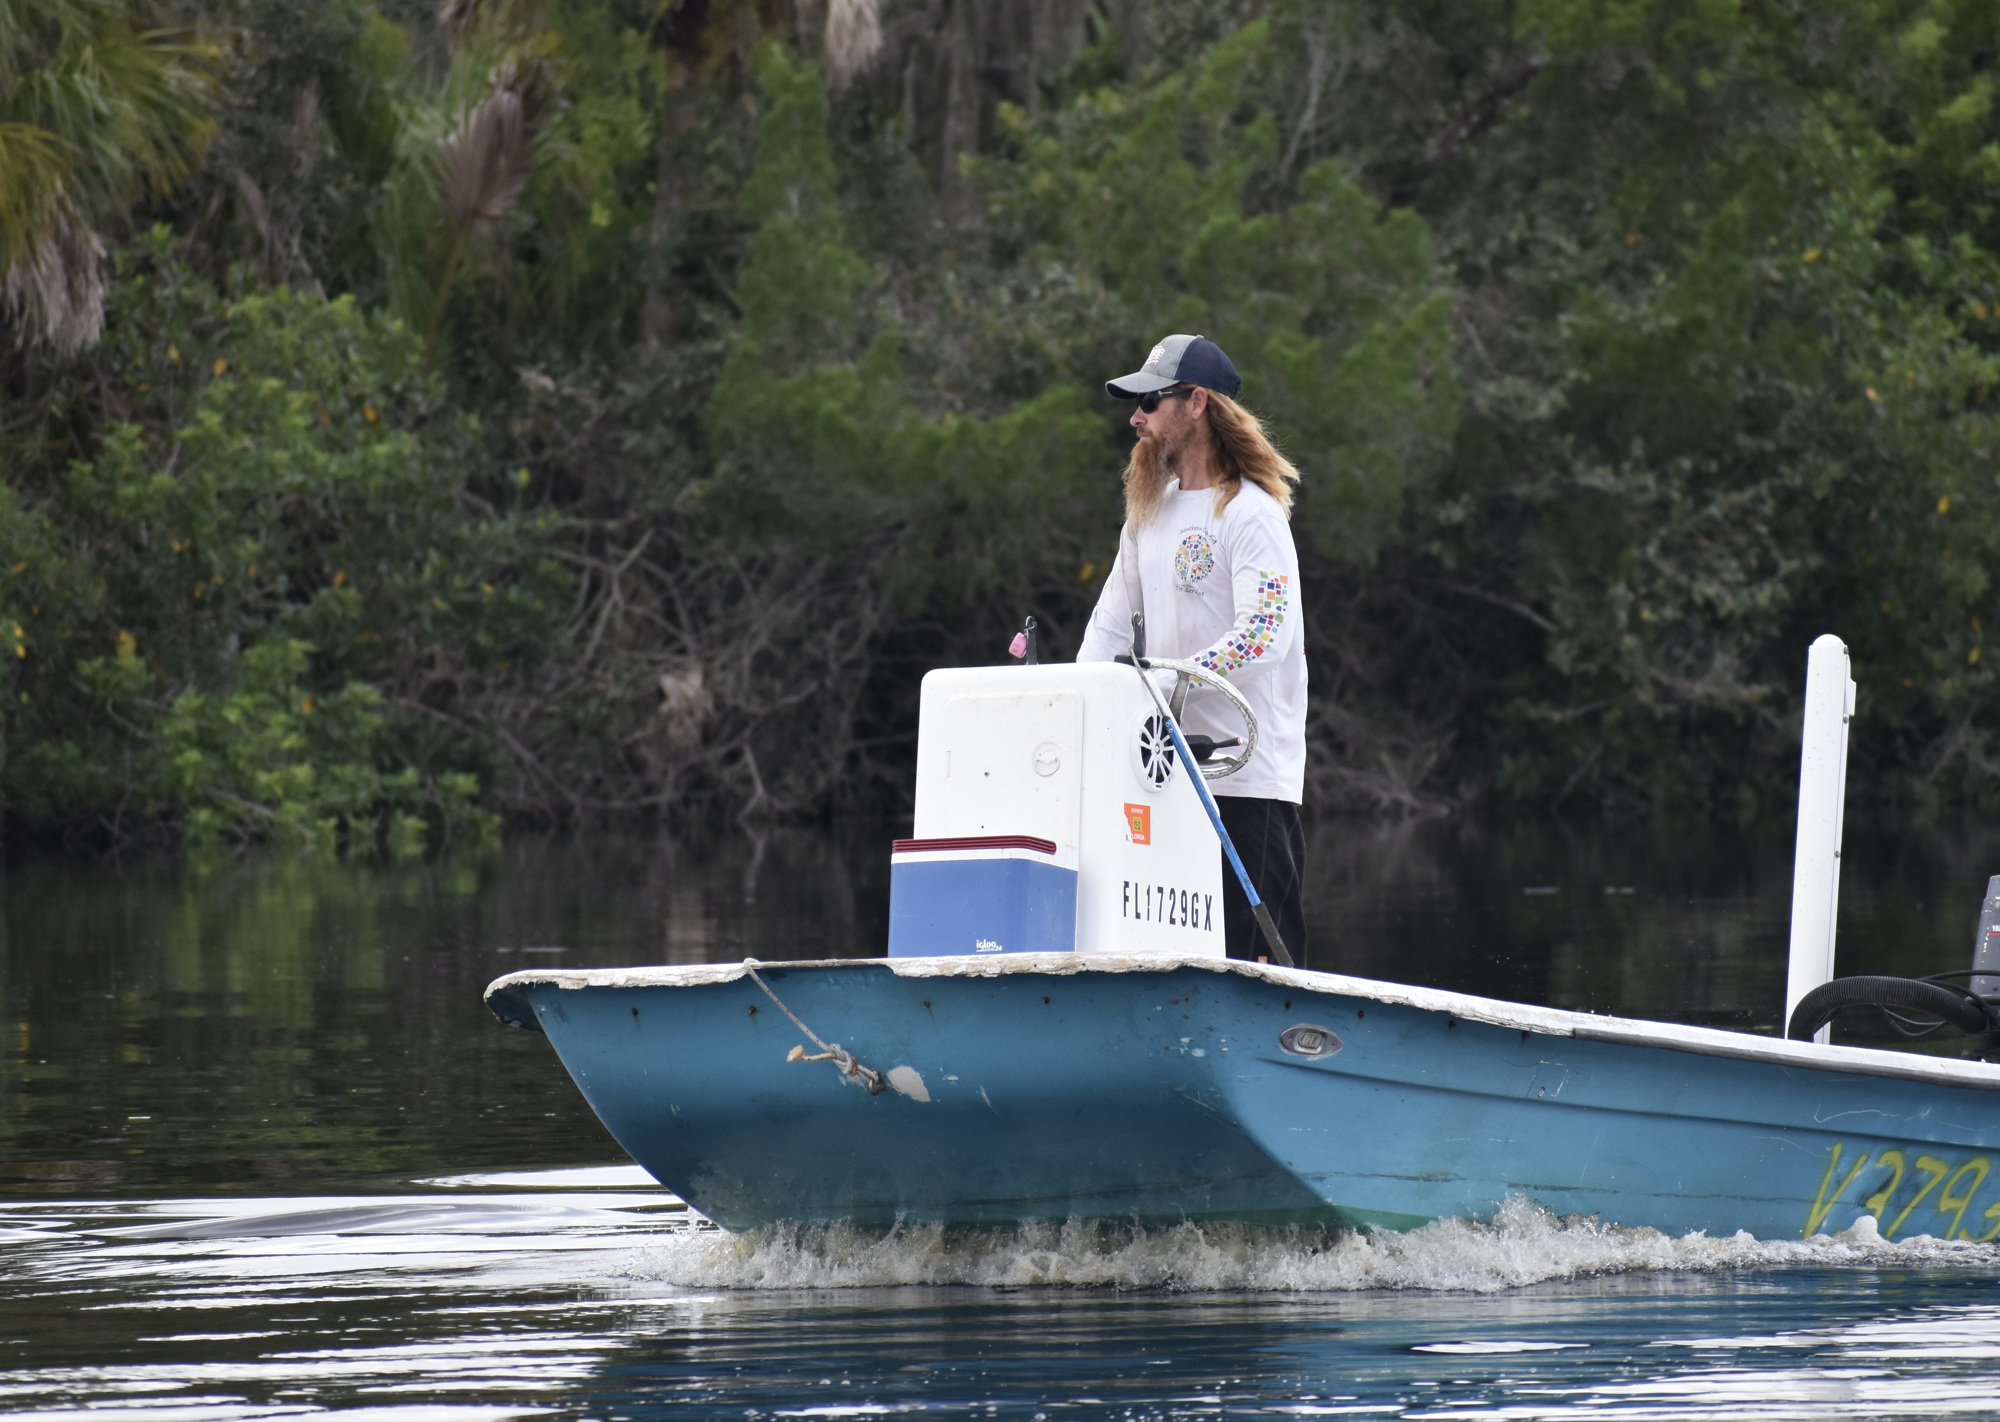 East County's Paul Caruso, a crab fisherman, heads into the Manatee River to pick up some of his deeper traps, a precaution he last took before Hurricane Irma in 2017. (Photo by Ian Swaby)